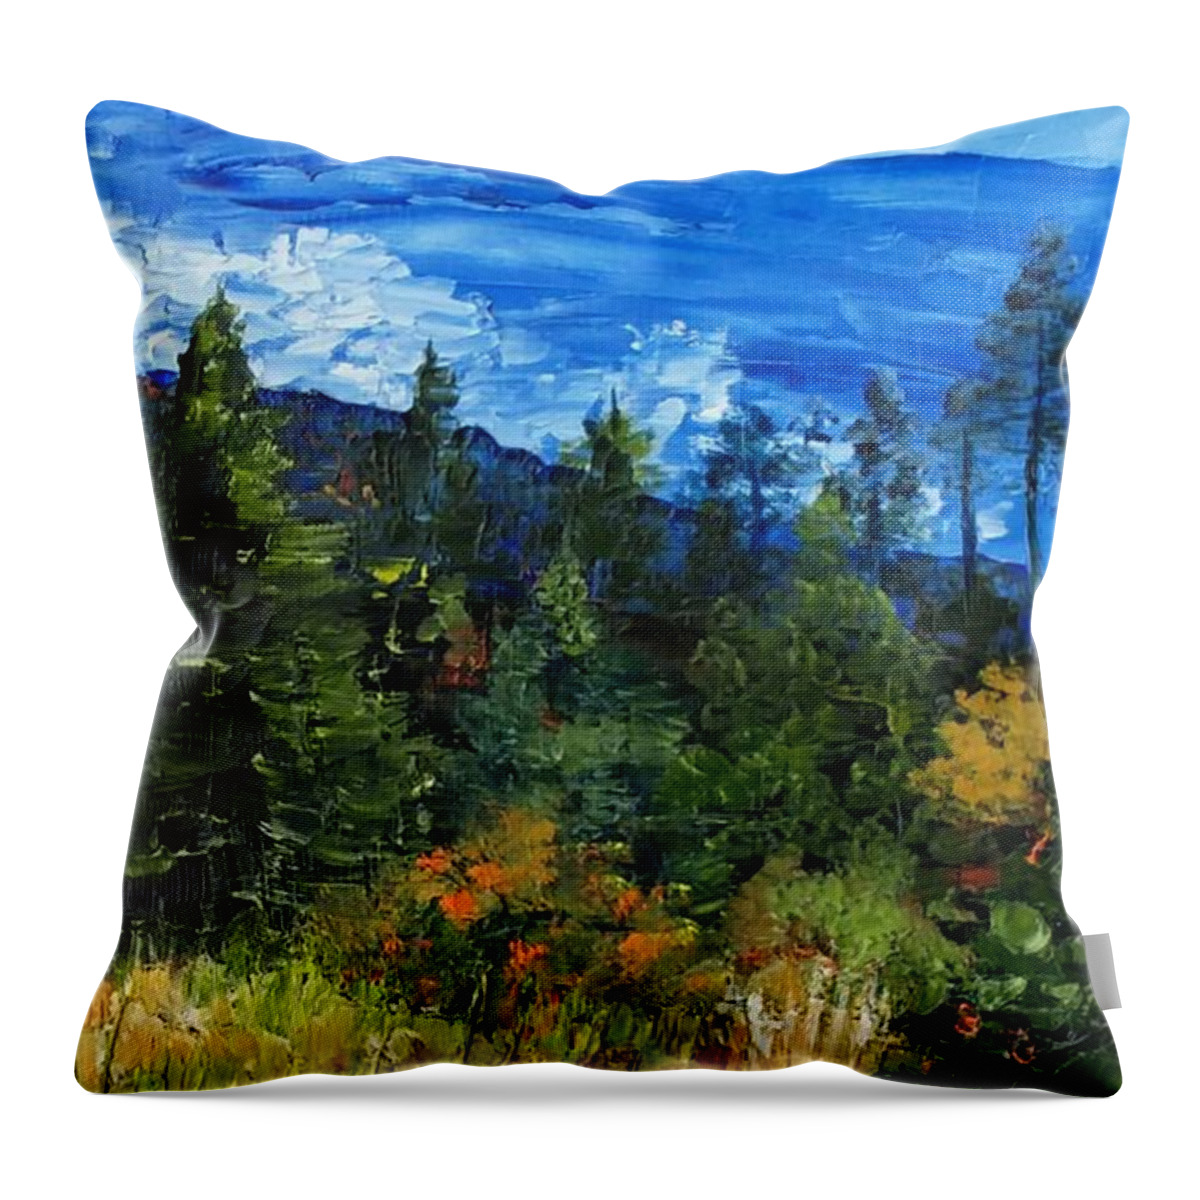 Clouds Throw Pillow featuring the painting Low Hanging Clouds by Joanne Stowell